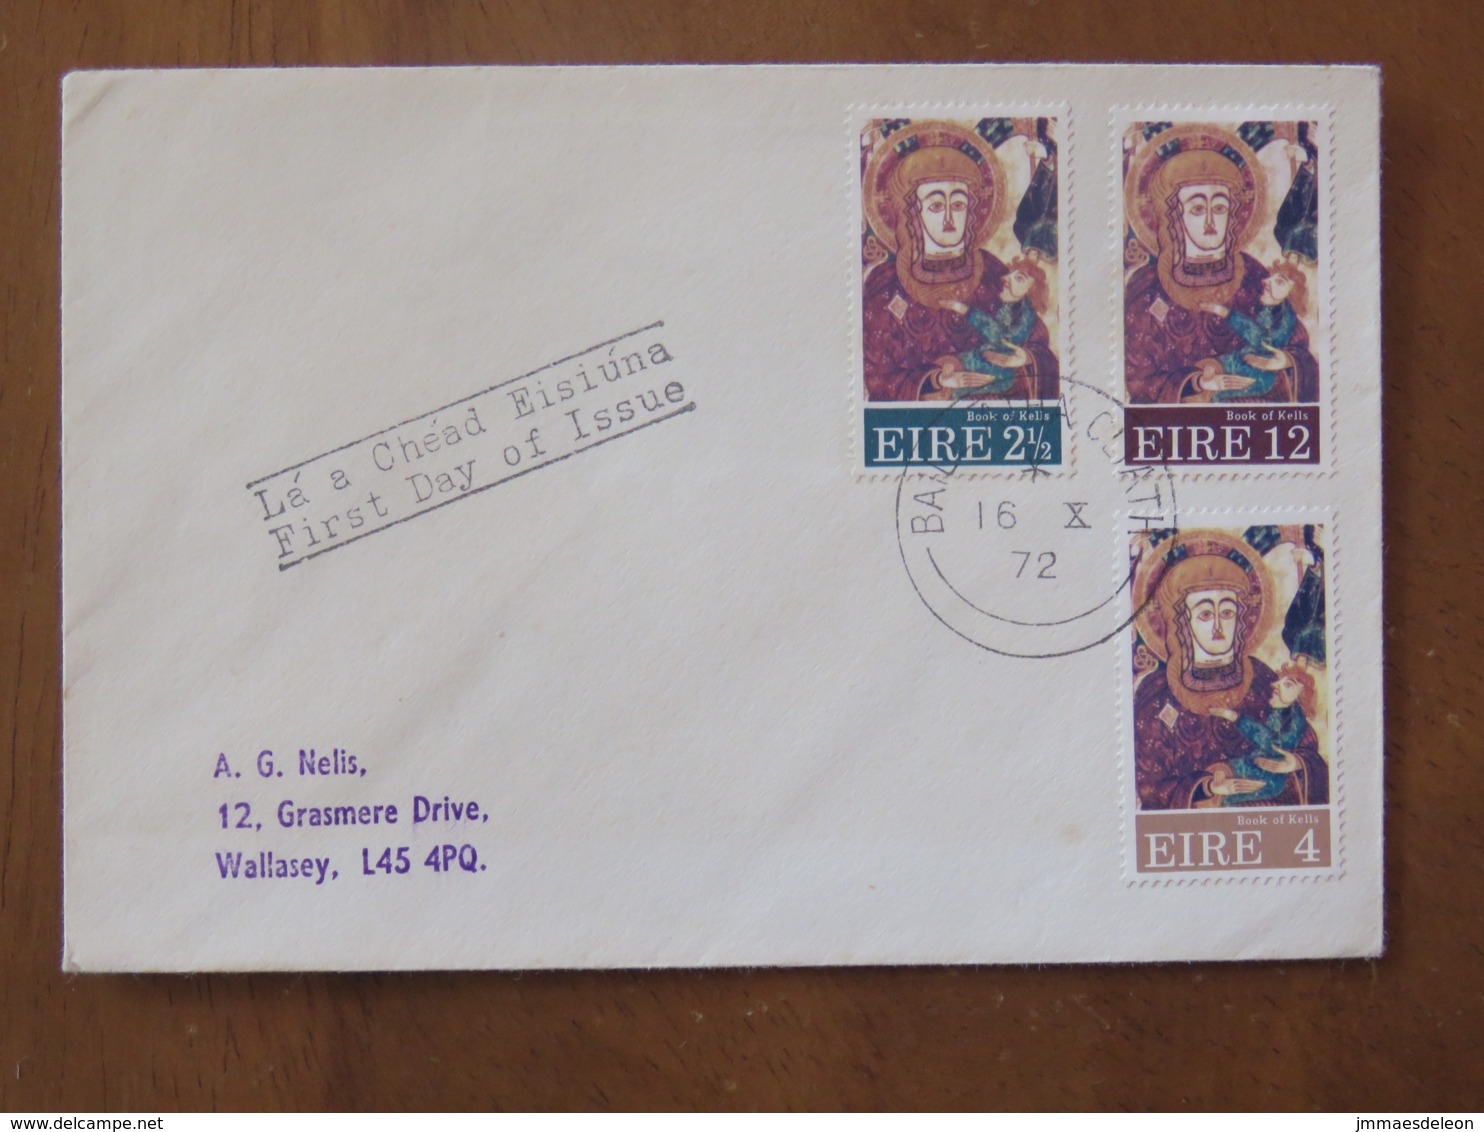 Ireland 1972 FDC Cover To England - Madonna And Child - Book Opf Kells - Lettres & Documents